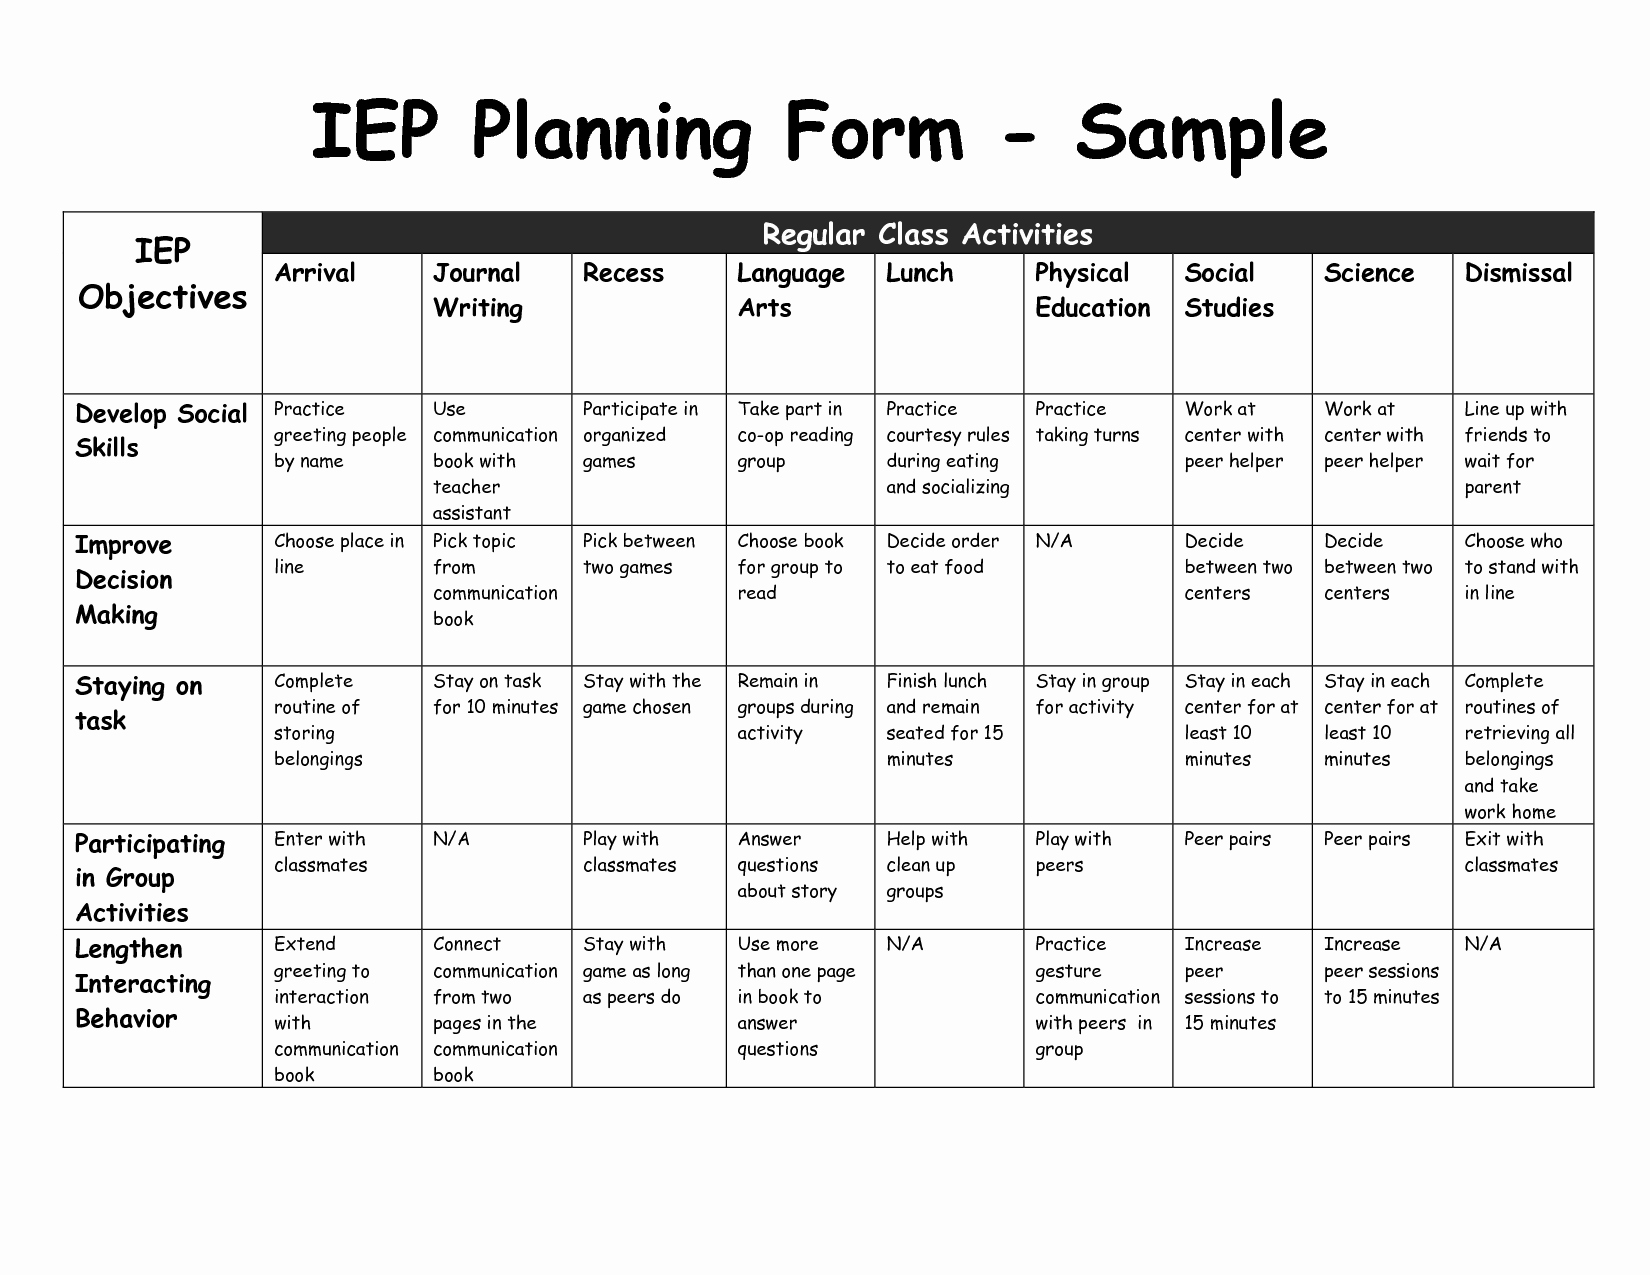 Individual Education Plan Template Best Of Iep Iep Planning form Sample